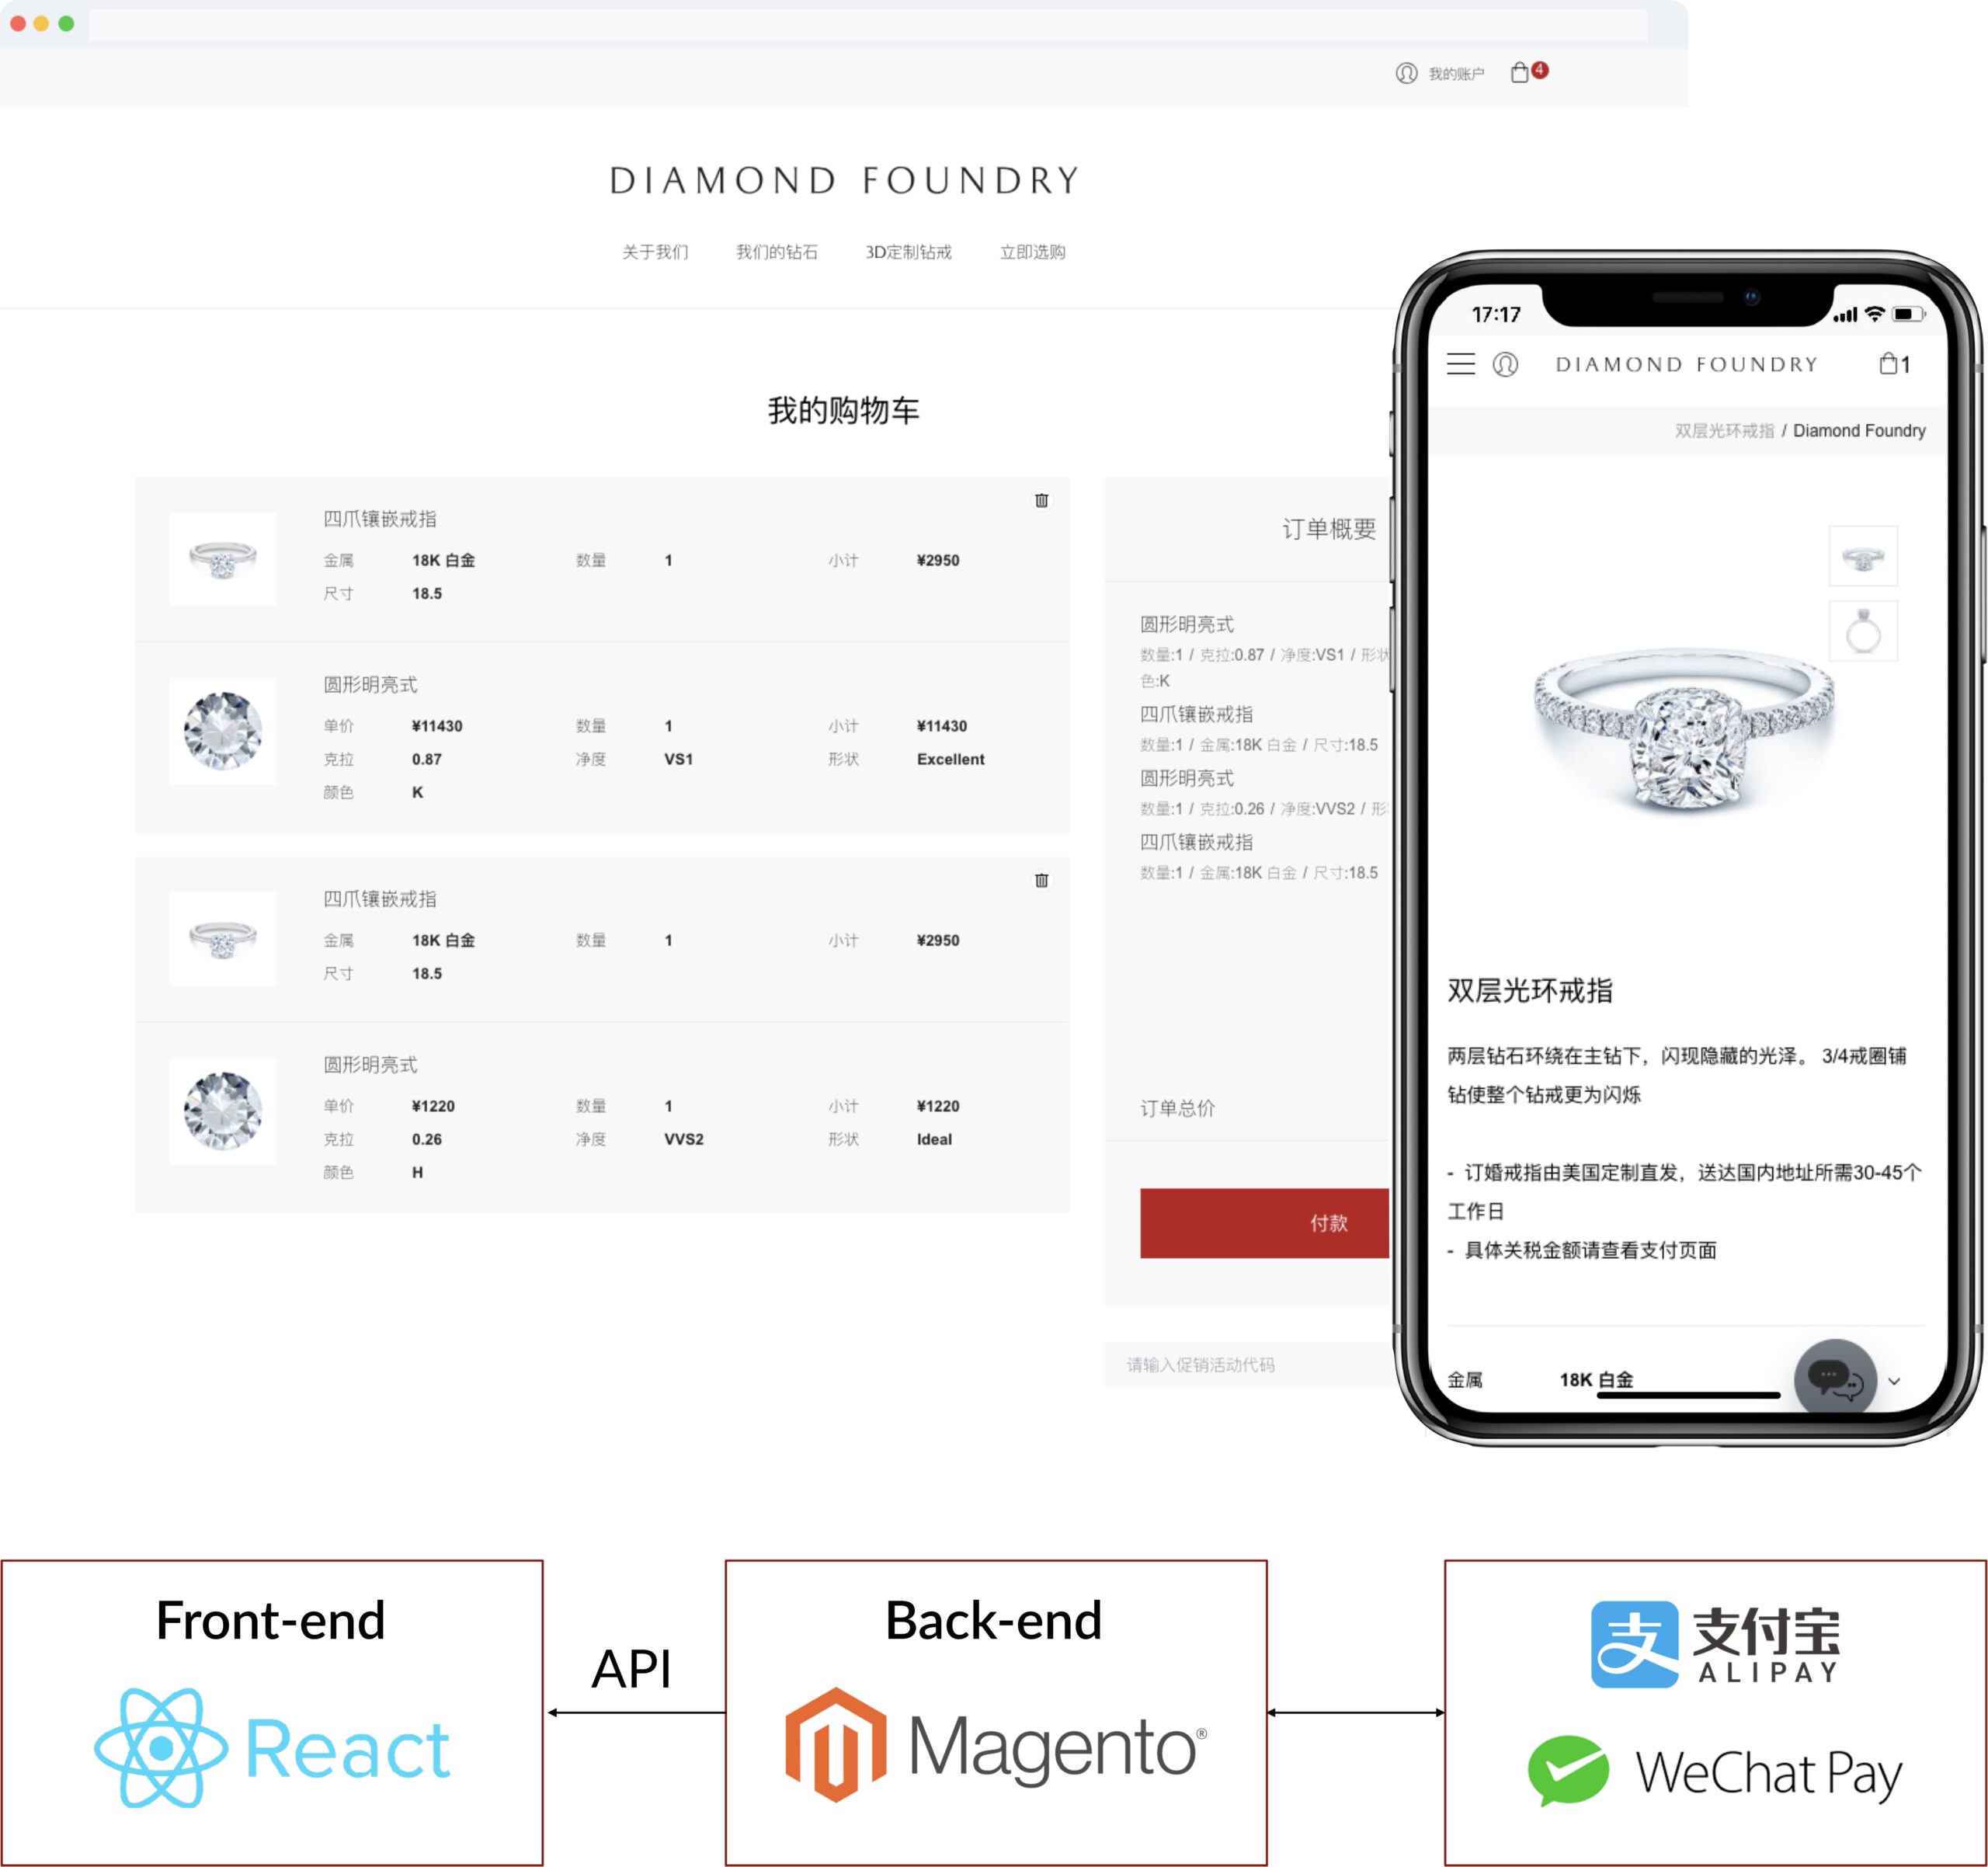 ITC helped Diamond Foundry integrate Alipay and WeChat Pay into its China e-Commerce website